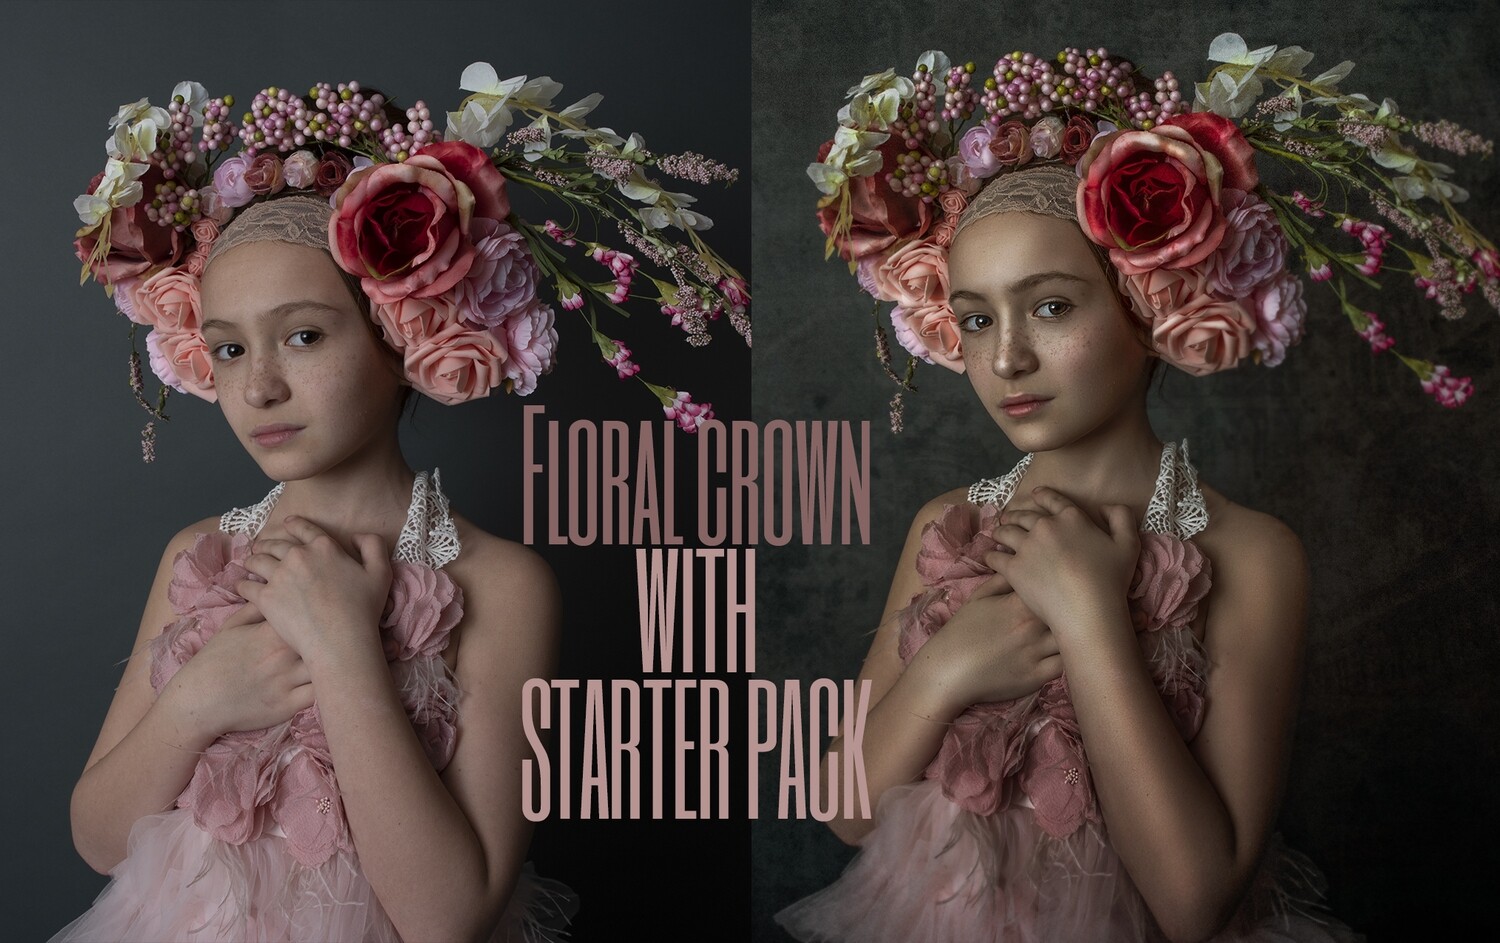 Floral Crown Art Painterly Photoshop Tutorial with STARTER PACK- Fine Art Tutorial by Tara Mapes